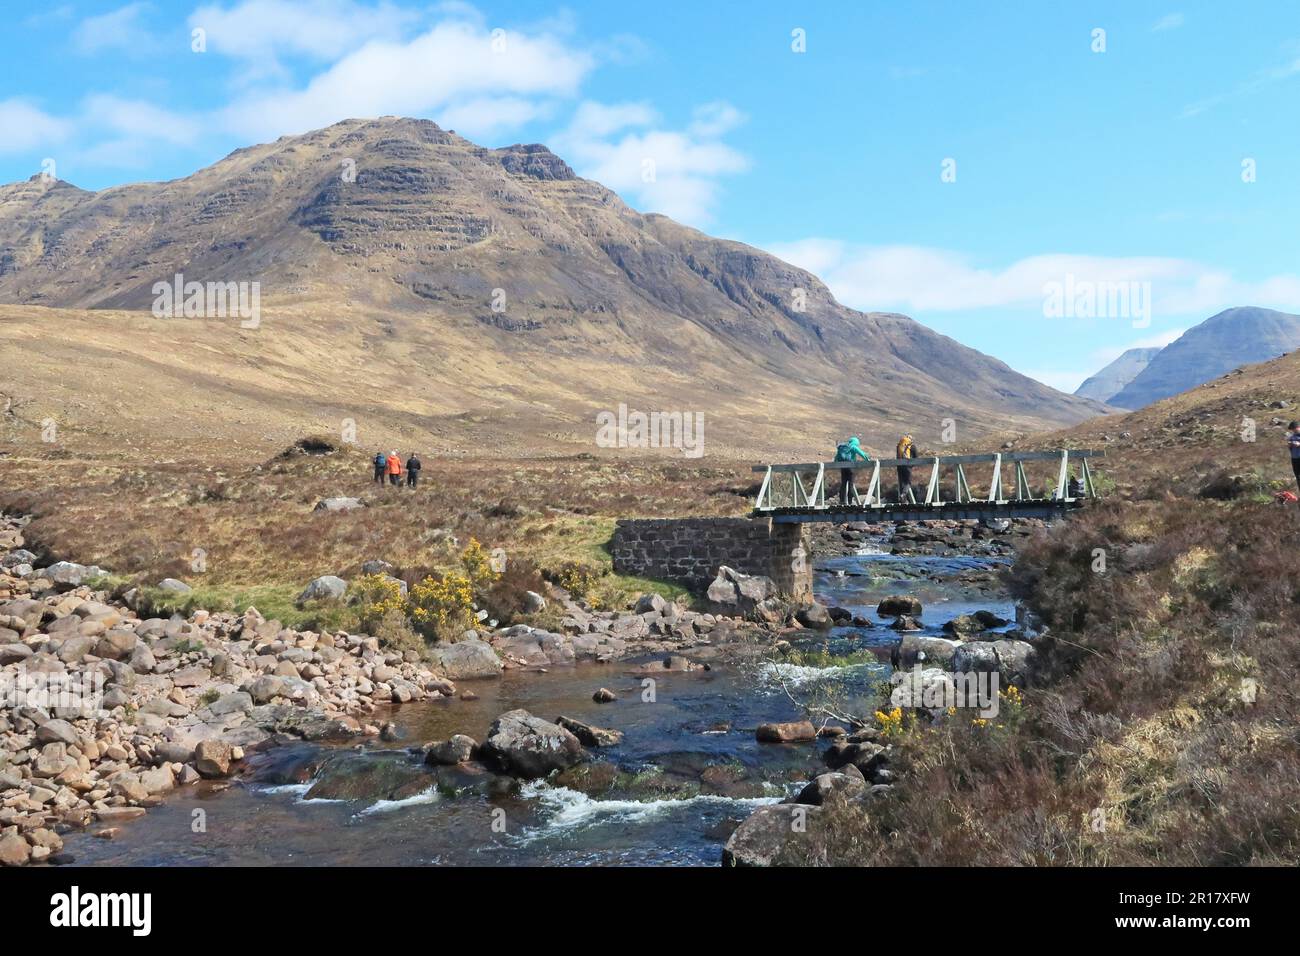 Scottish Highlands: walkers in valley of Coire MhicNobaill, near Torridon. Shows the dramatic peak of Beinn Dearg in the background. Stock Photo